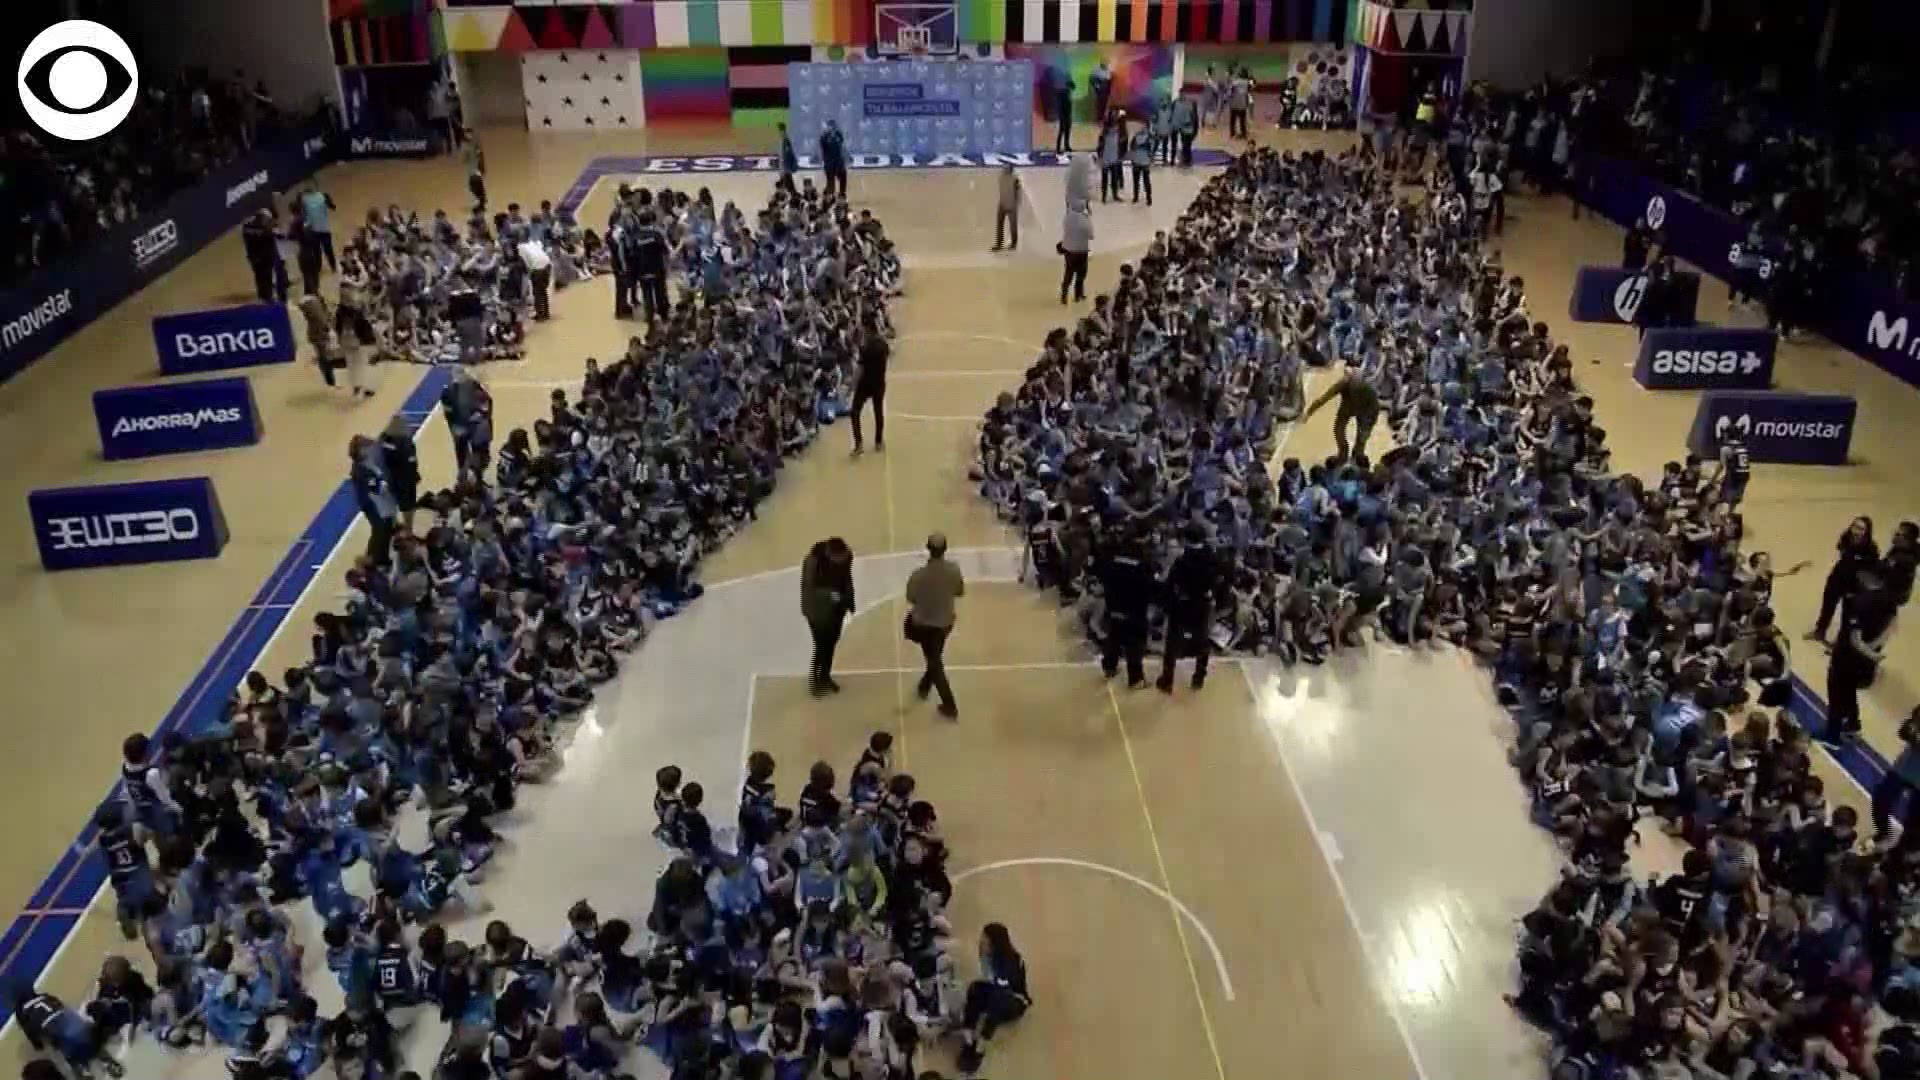 Youth basketball players in Madrid, Spain paid tribute to late basketball legend Kobe Bryant. They formed a giant "24" - one of Kobe's jersey numbers as a Laker.